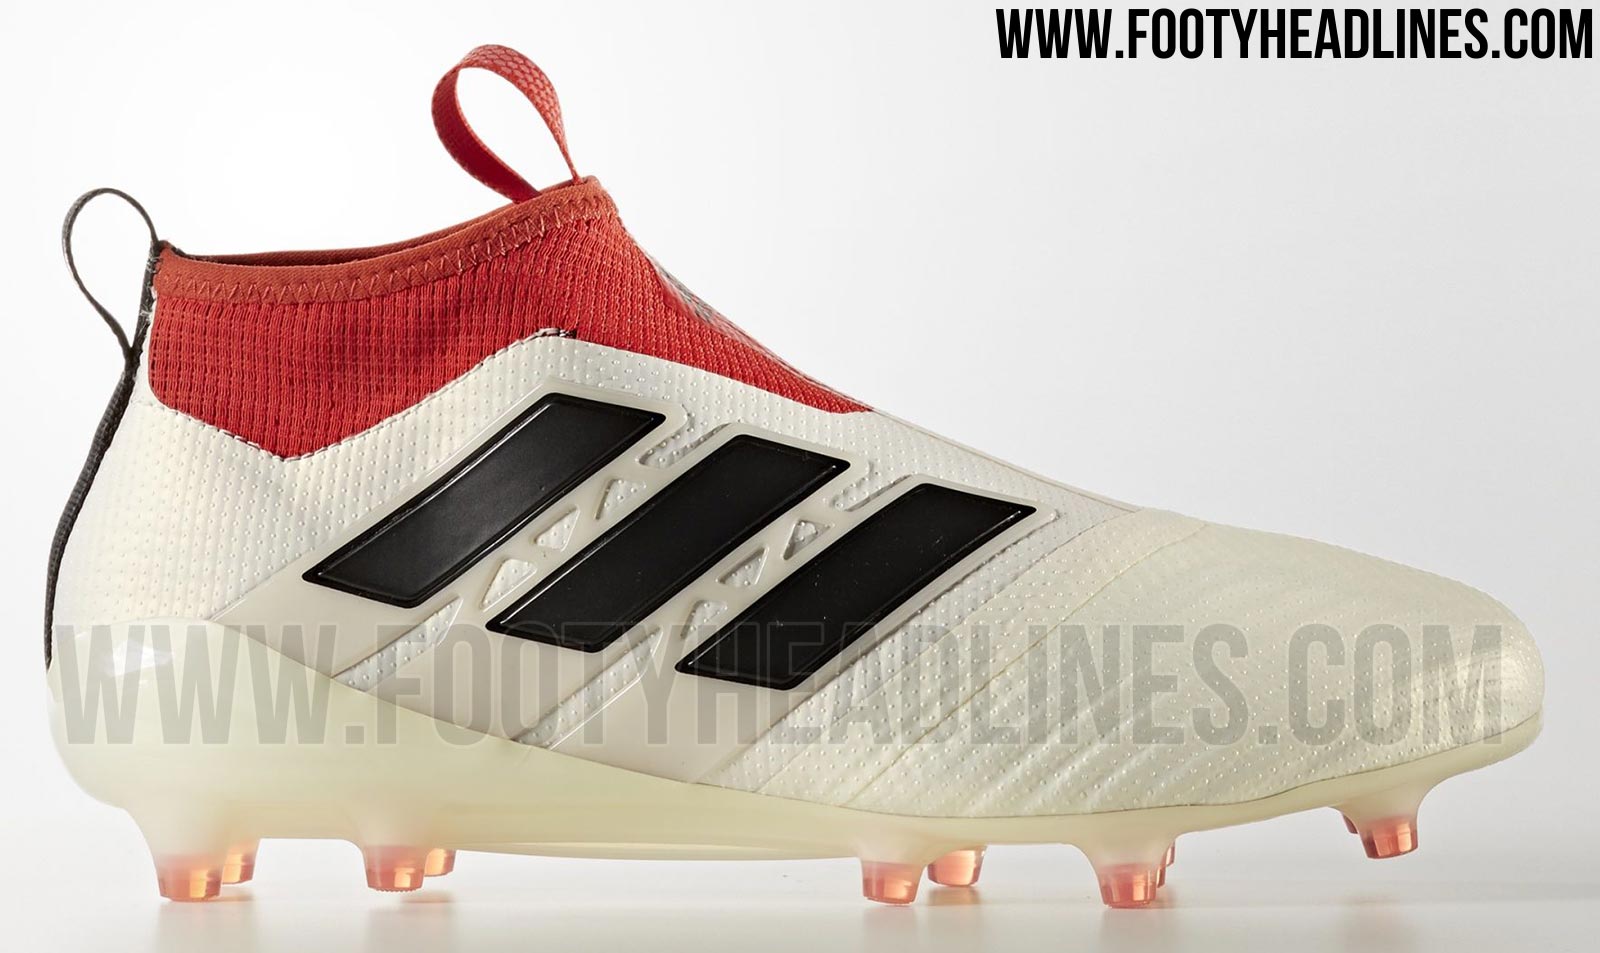 adidas ace limited edition